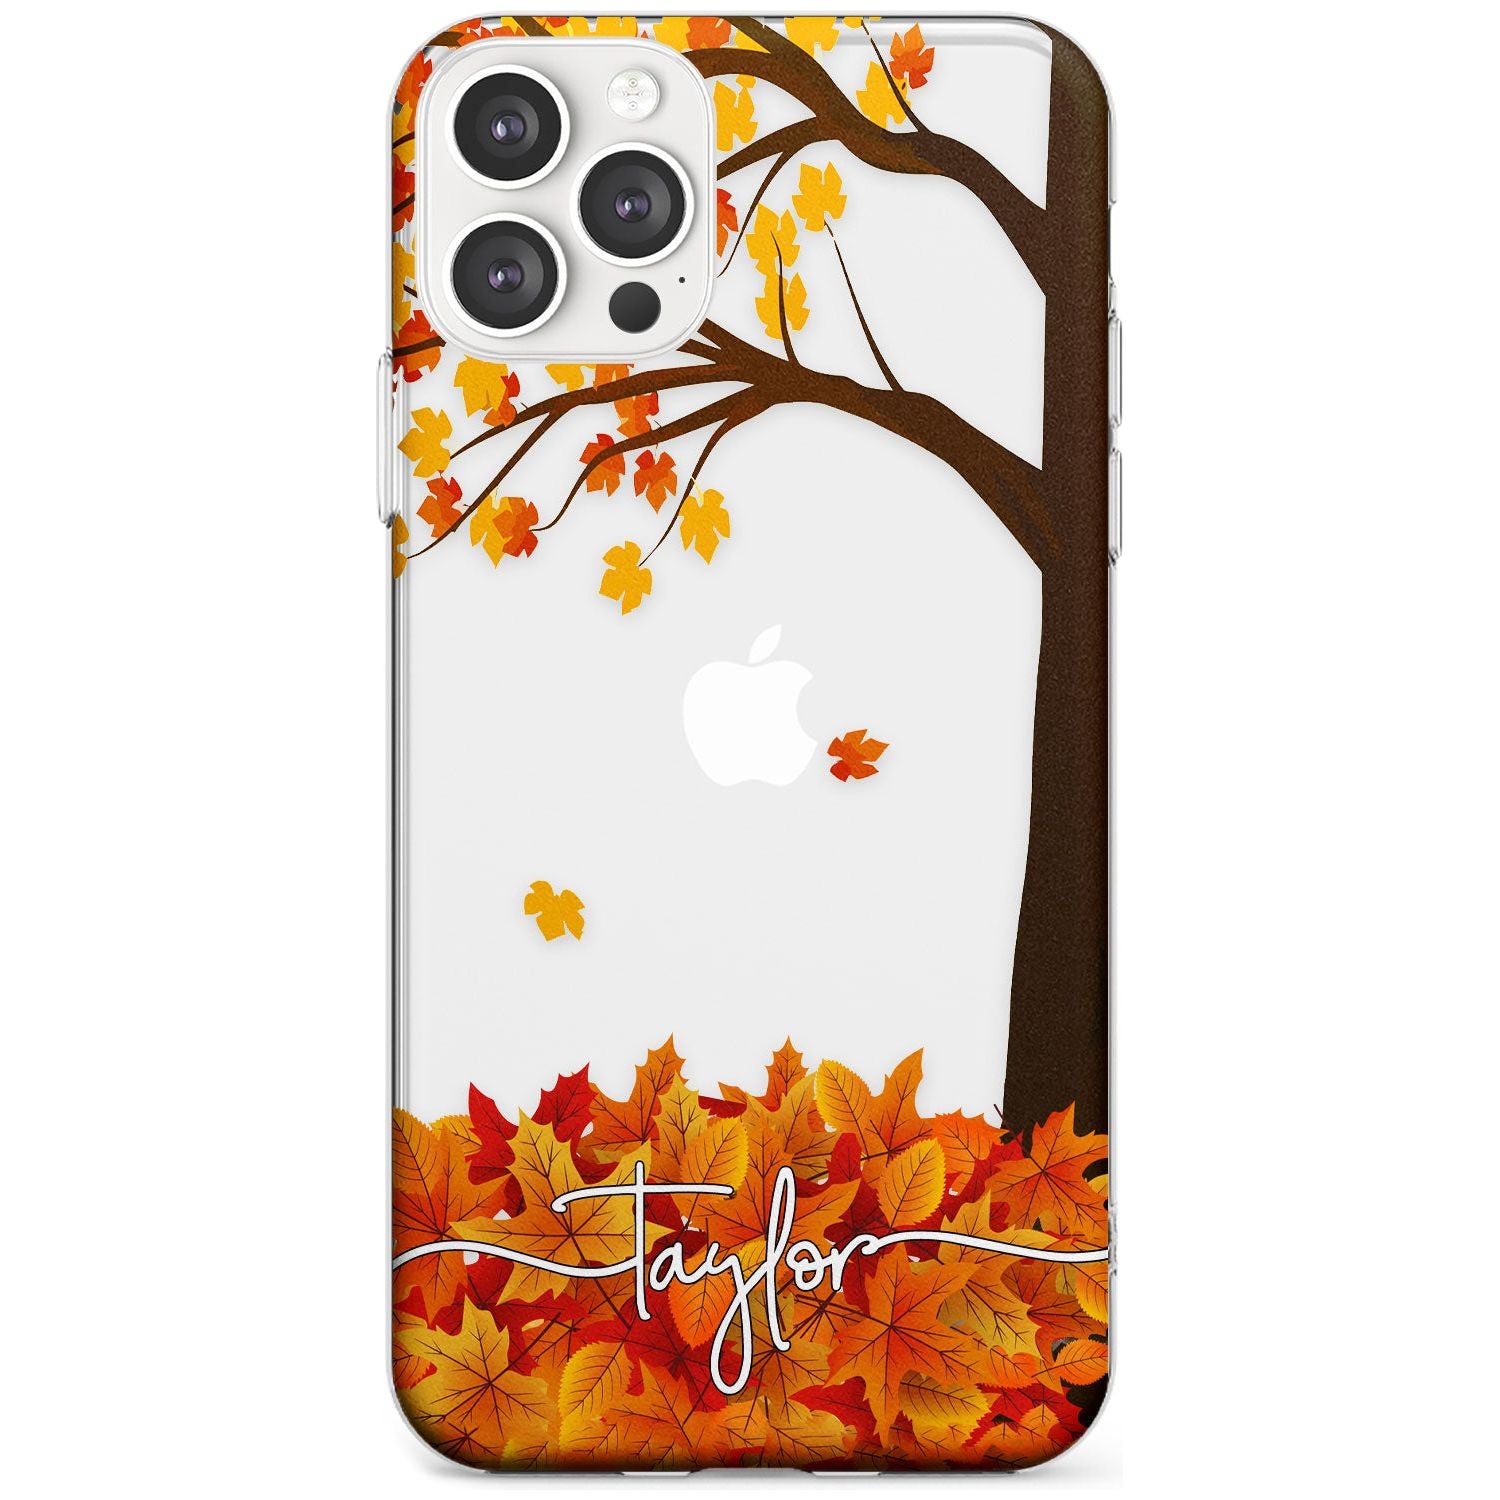 Personalised Autumn Leaves Slim TPU Phone Case for iPhone 11 Pro Max